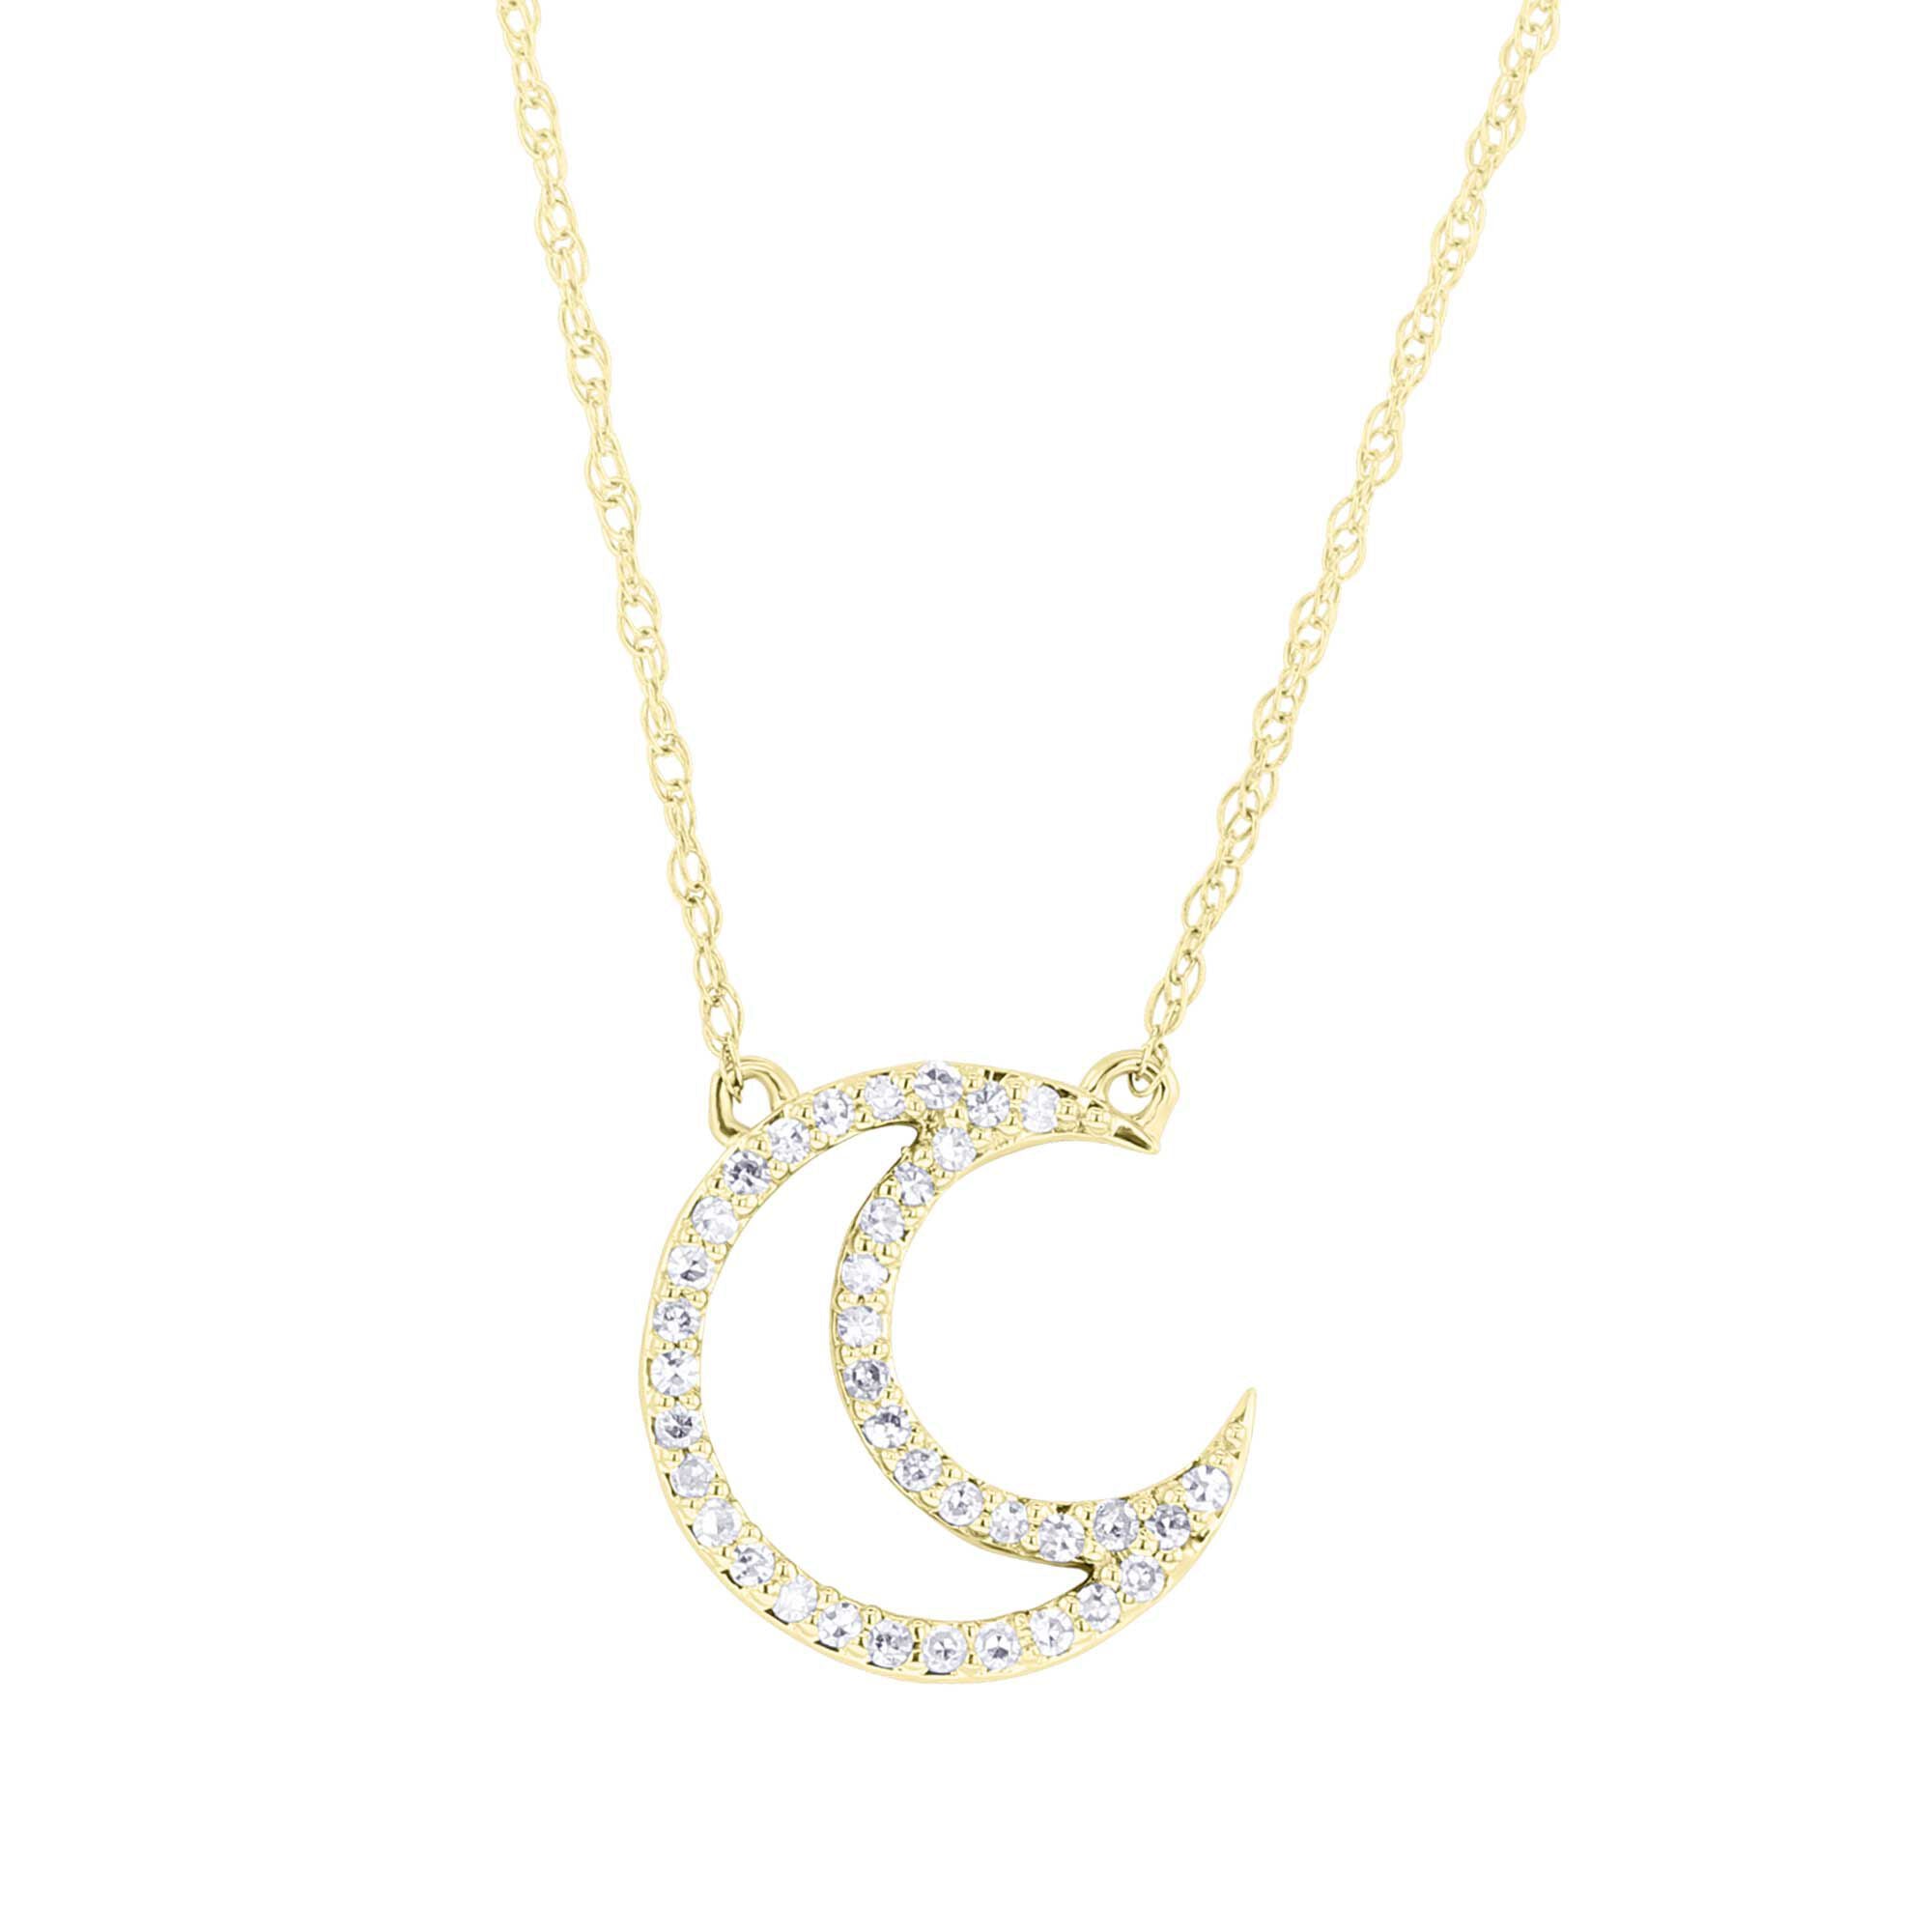 Crescent Moon Black and White Diamond Necklace